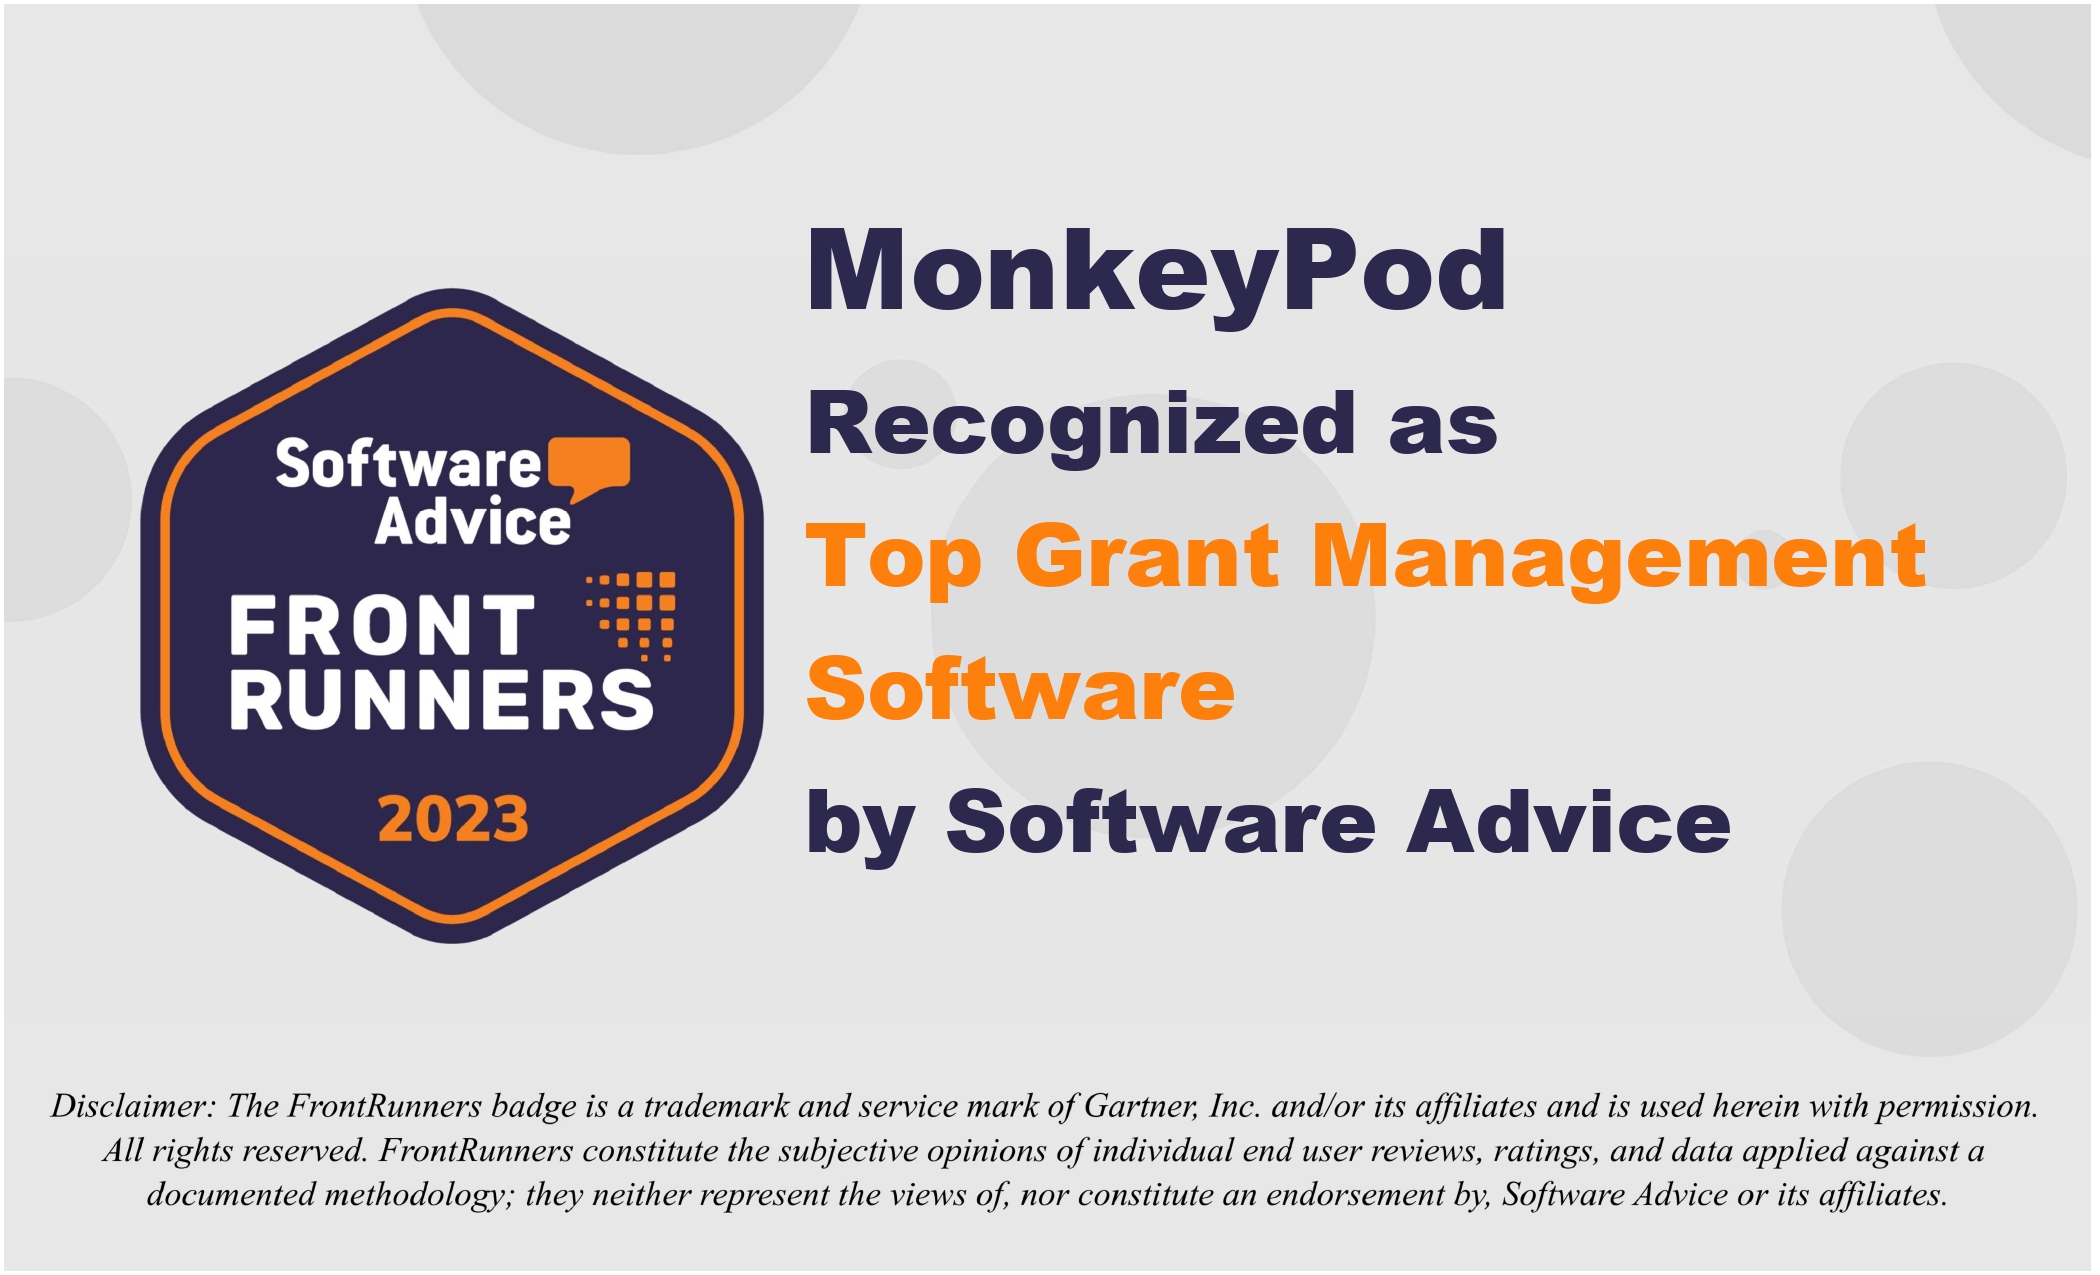 Software Advice: Top Grant Management Software